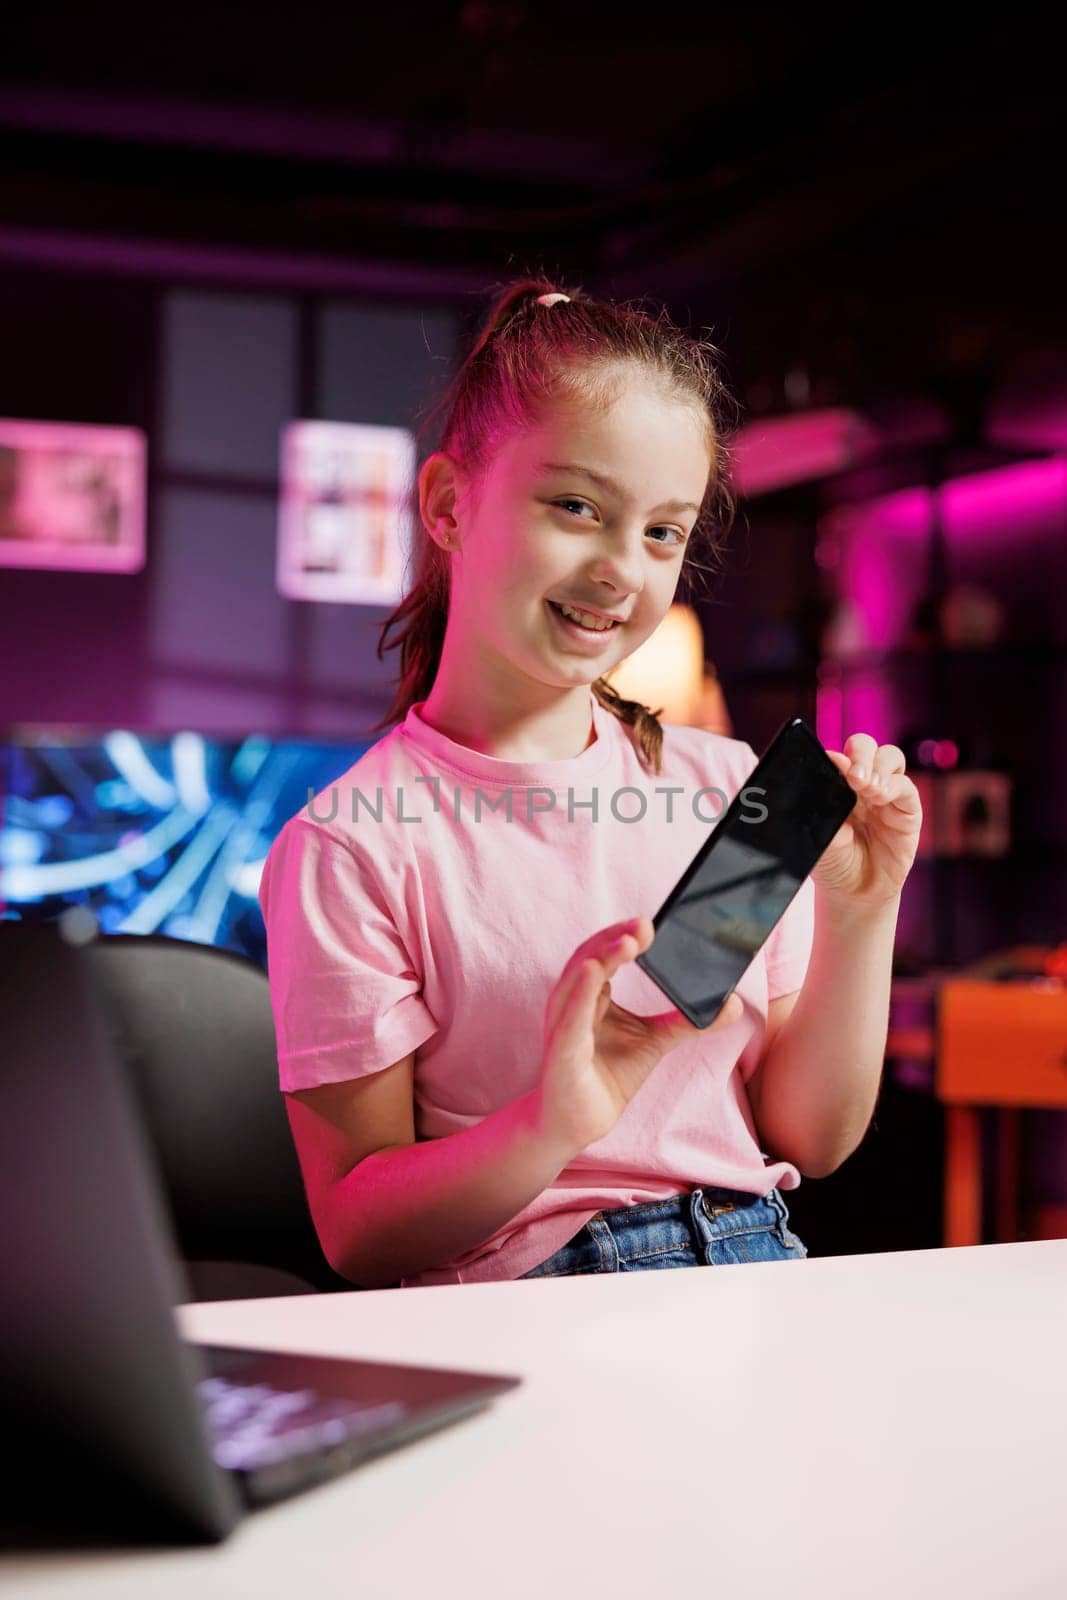 Kid internet show host filming content about best cellphones on the market in neon pink lit apartment. Young media star recording mobile phone review for tech enthusiasts